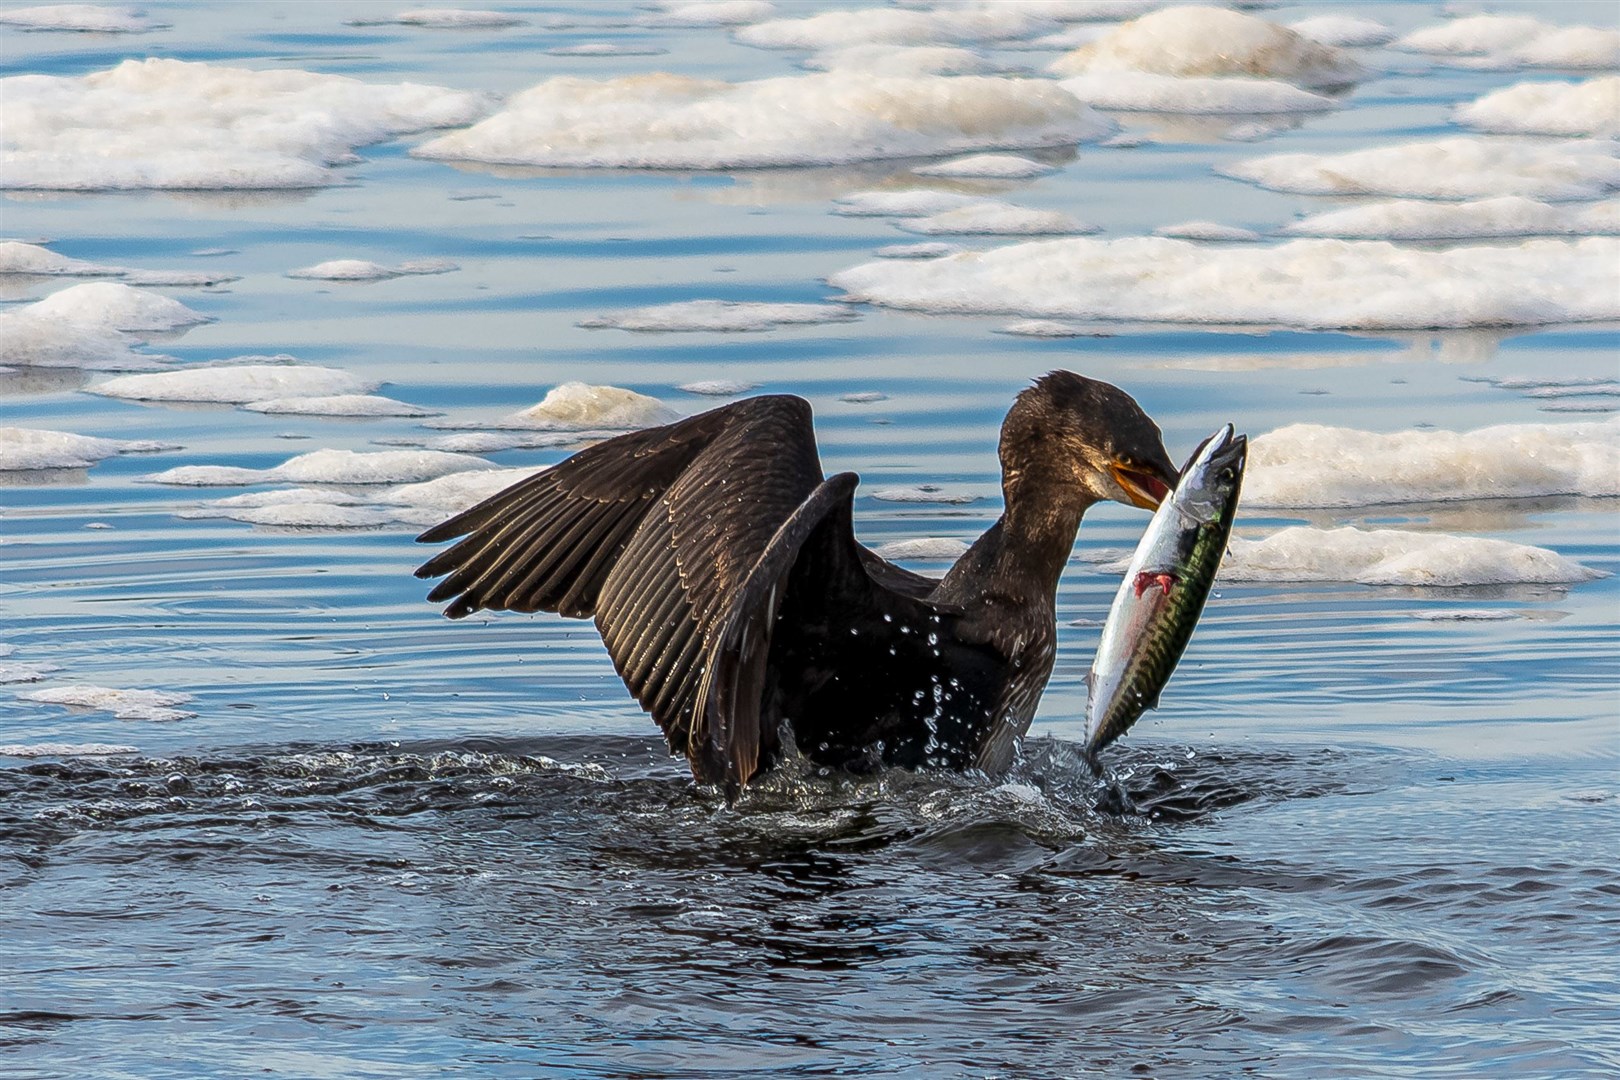 Angus Chisholm, from Invergordon, won the story category with this photograph of a cormorant catching its dinner.